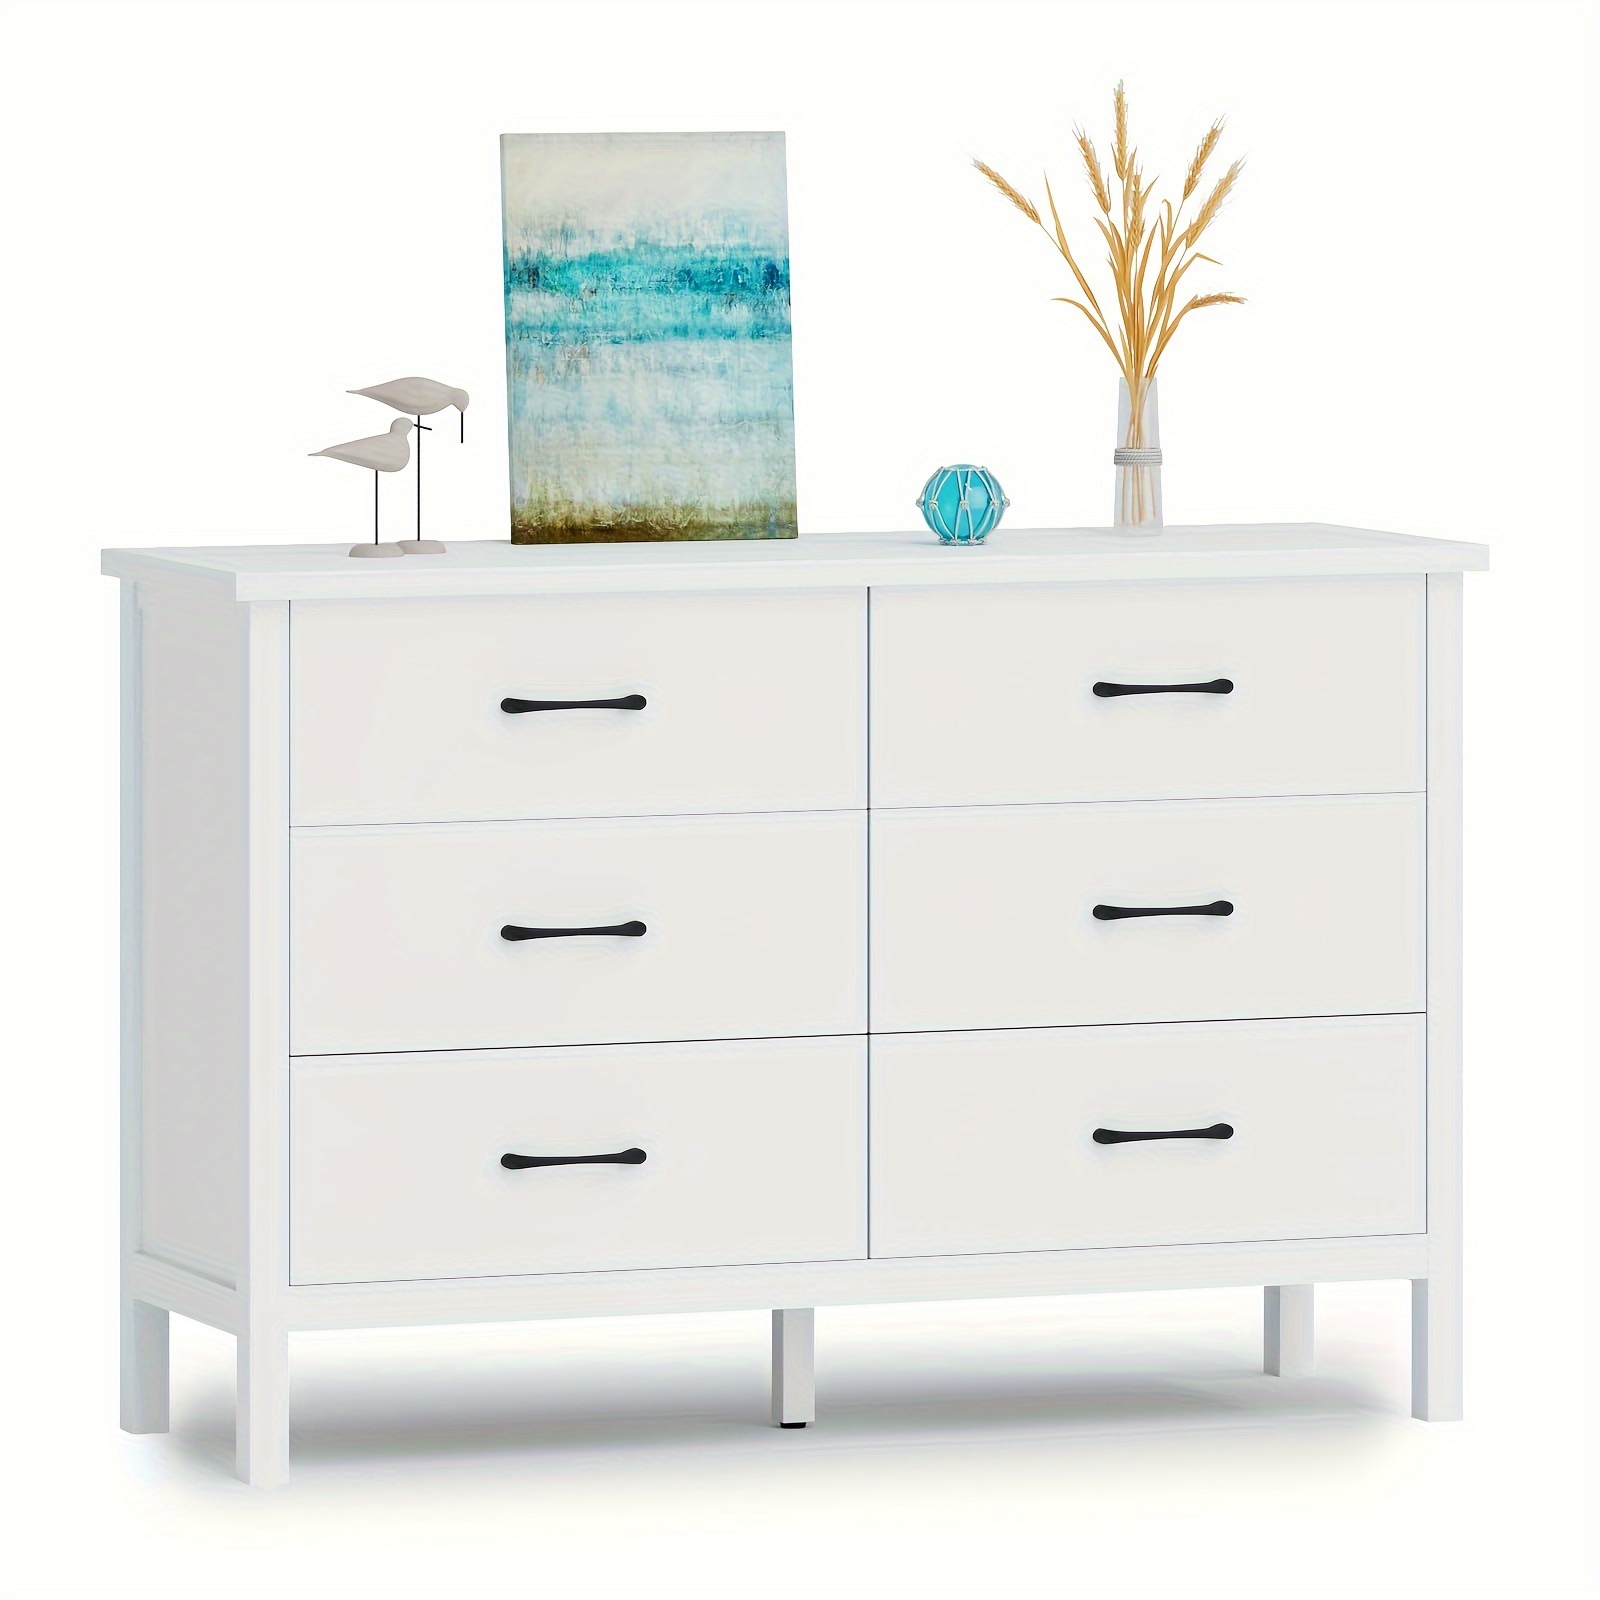 

Carpetnal Dresser For Bedroom With 6 Drawers, Modern Dresser With Golden Handles, Wood Storage Organizer Chest Of Drawers For Nursery, Hallway